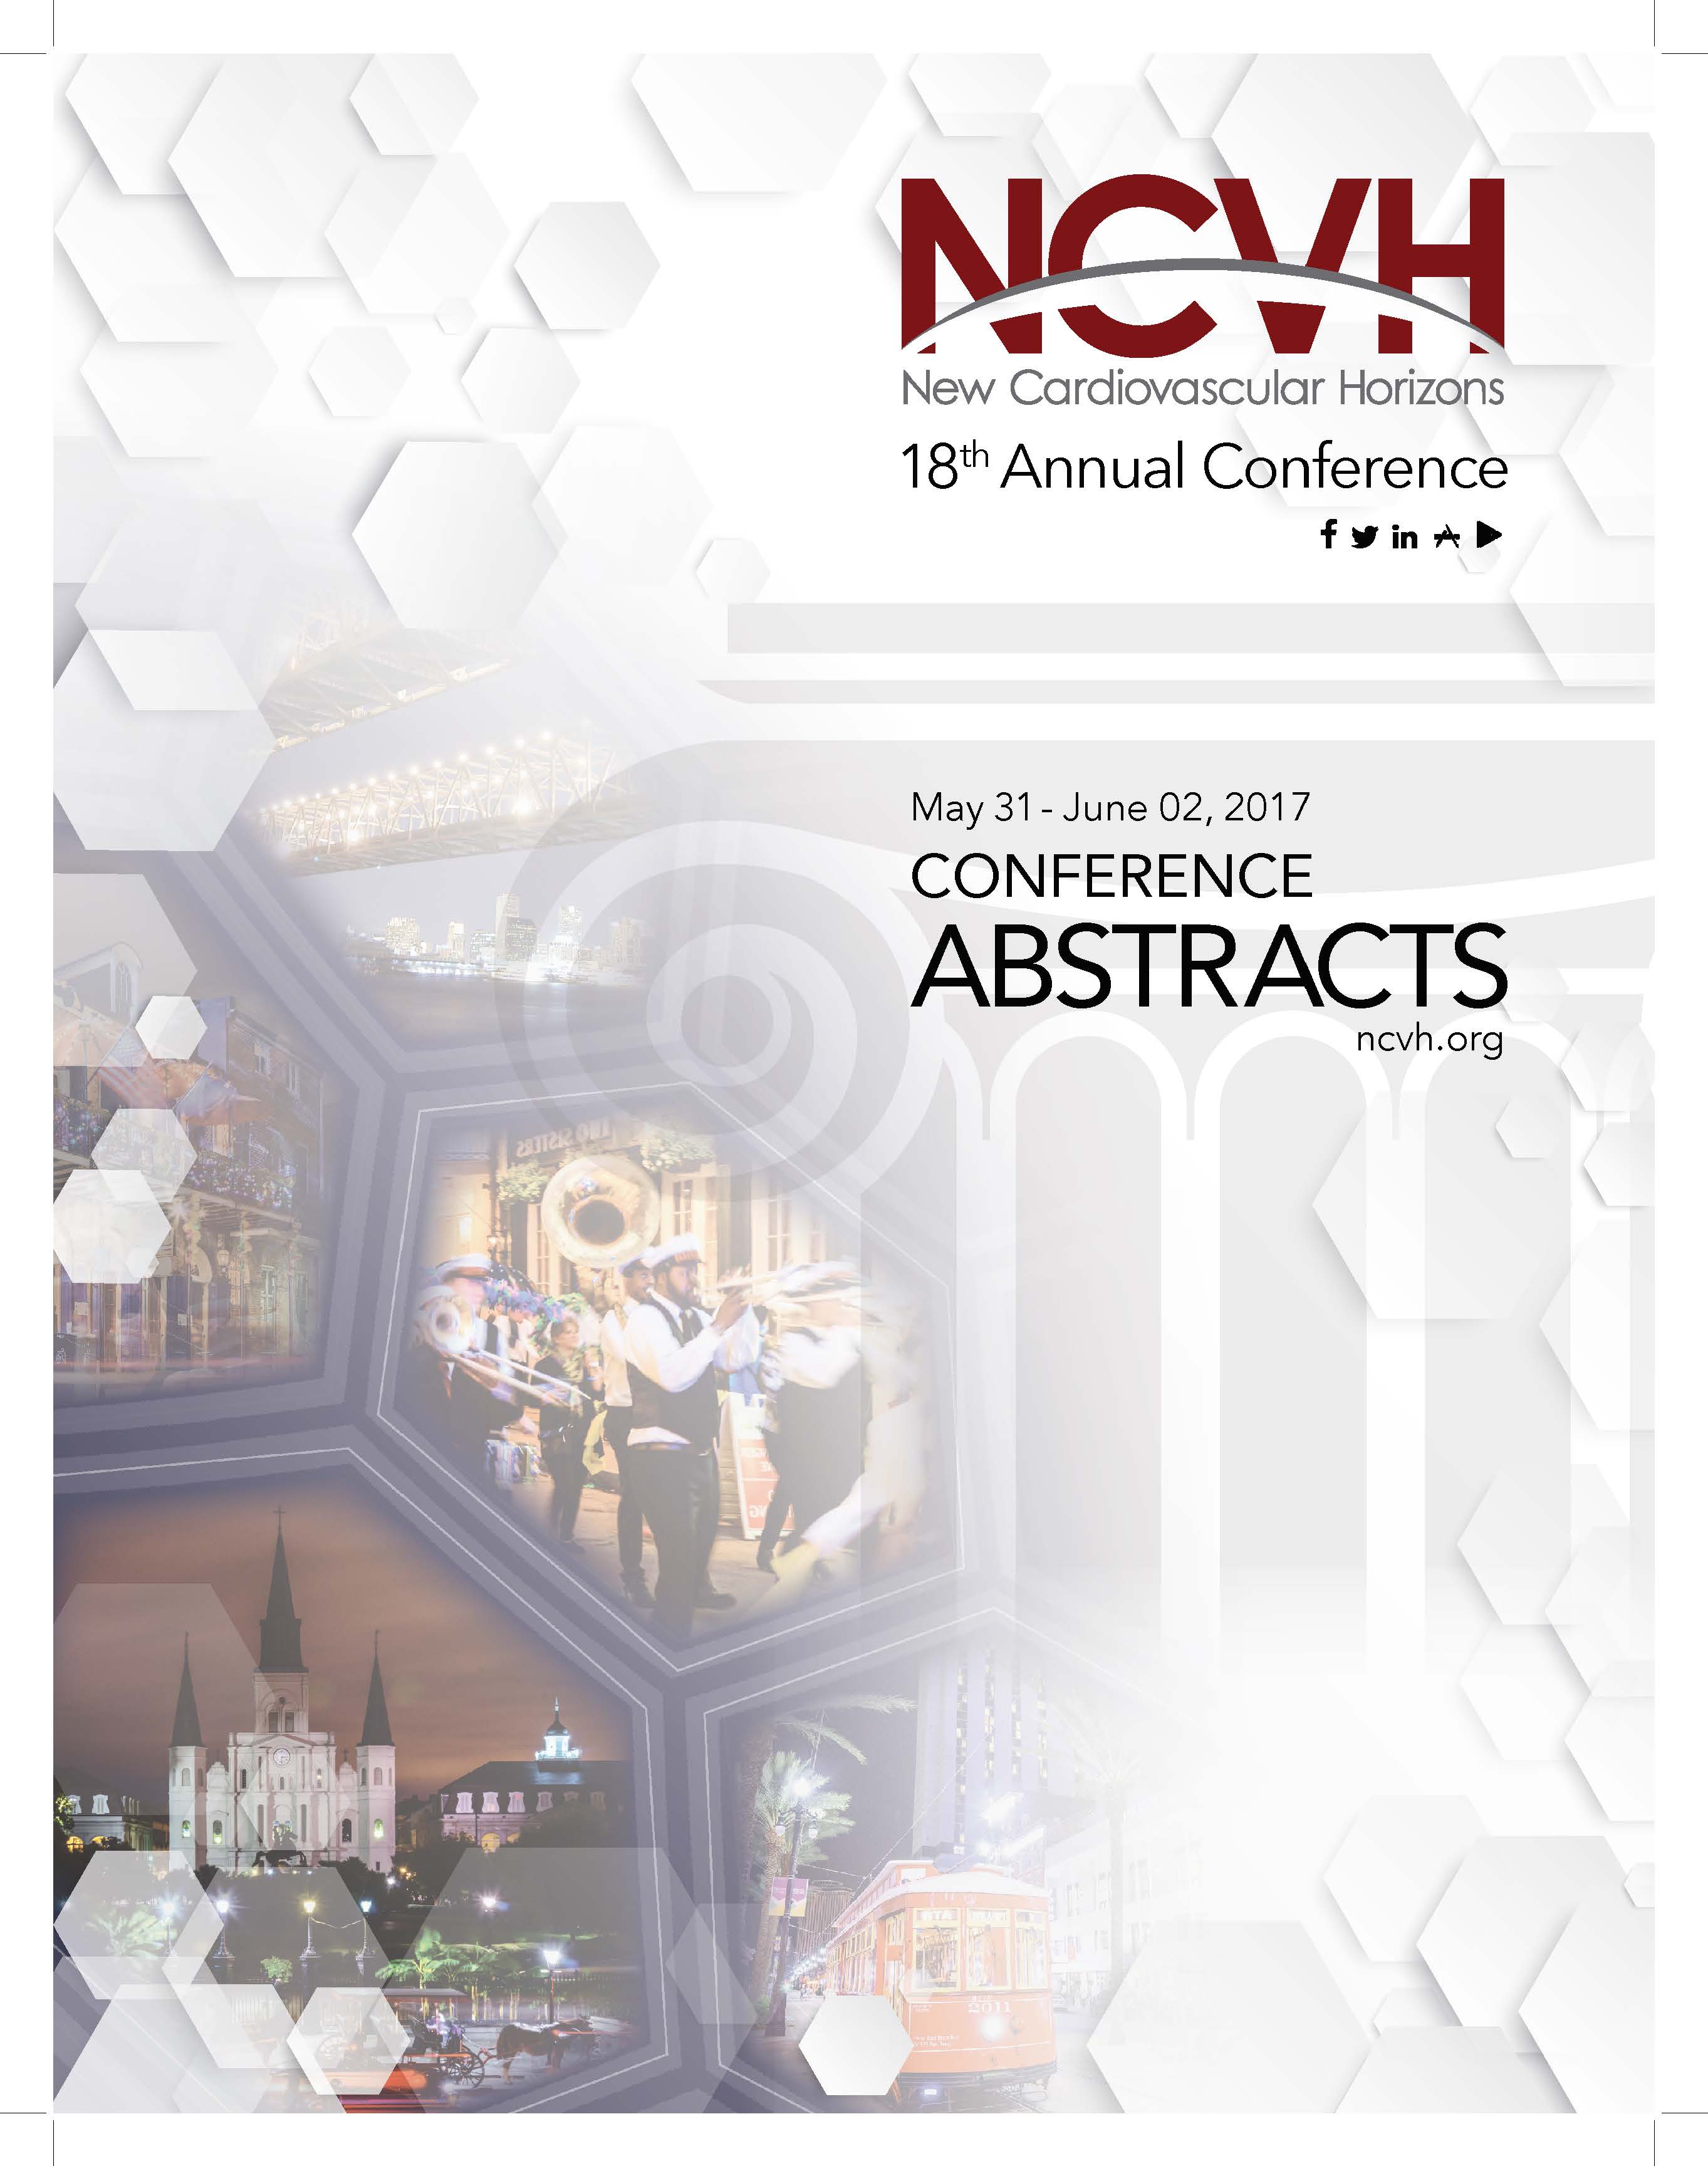 Abstracts - NCVH 2017